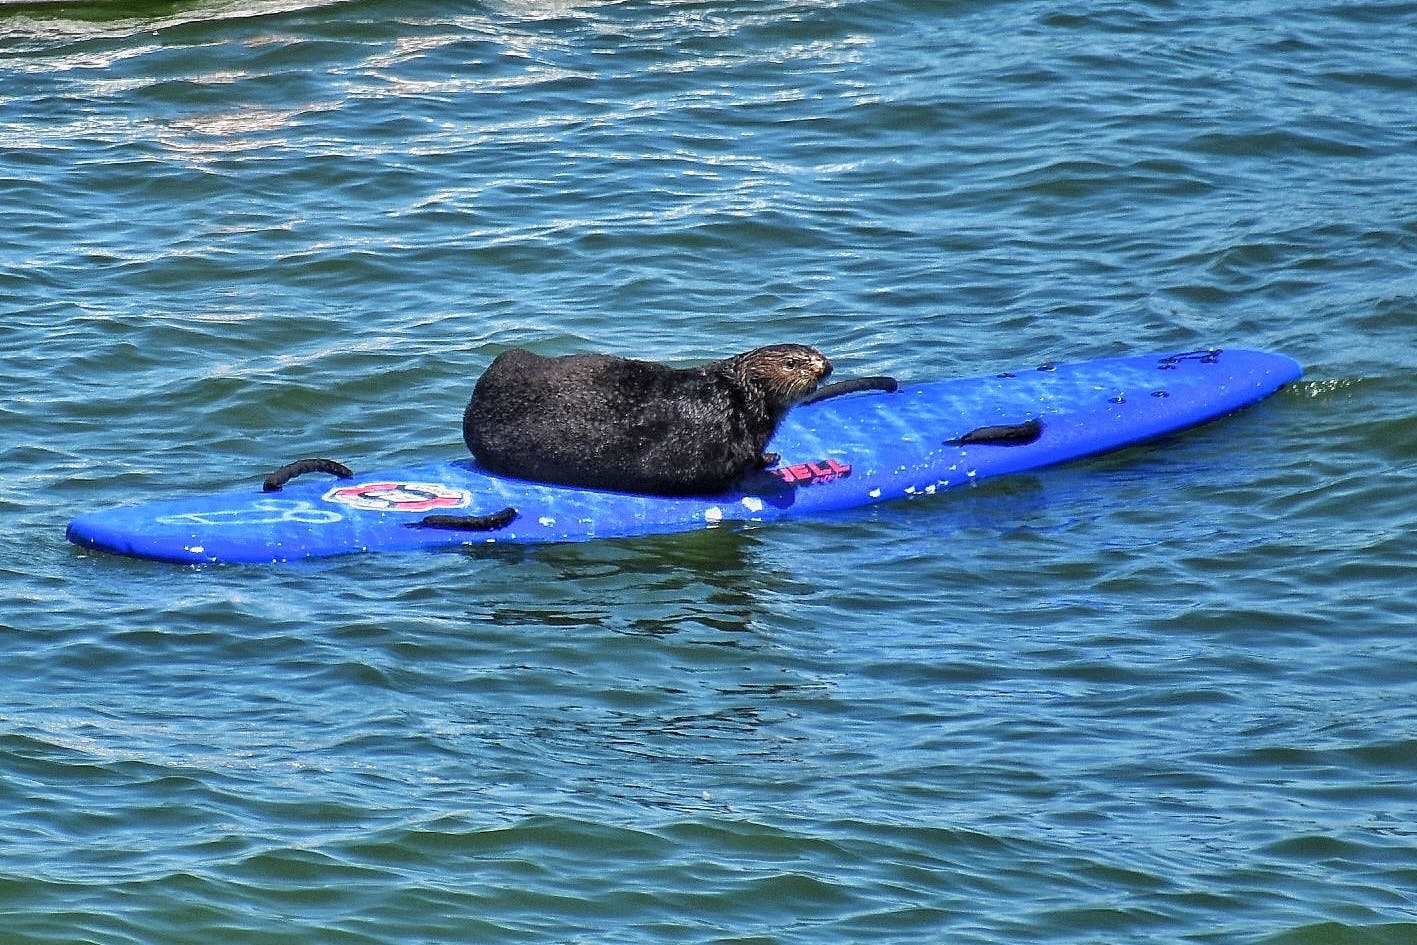 841, the Santa Cruz, CA otter that made nation wide news, snatches another longboard out in Pacific Ocean